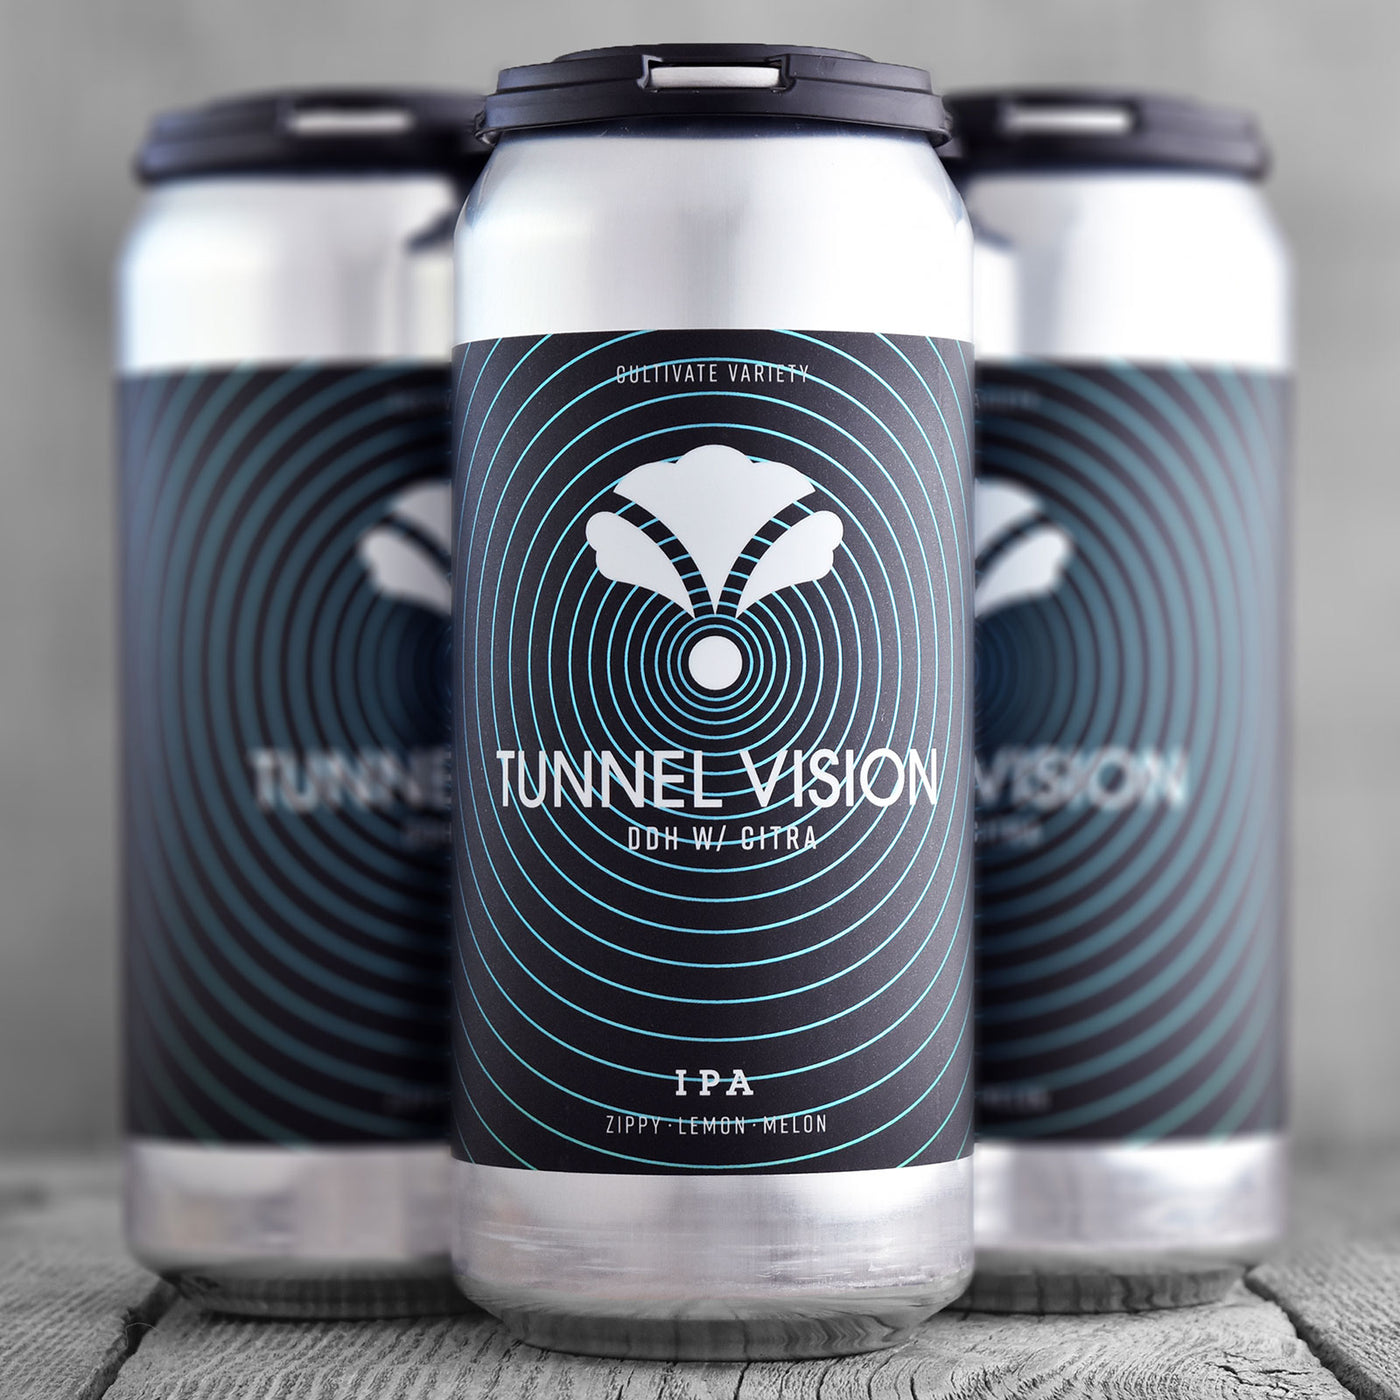 Bearded Iris Tunnel Vision DDH W/ Citra